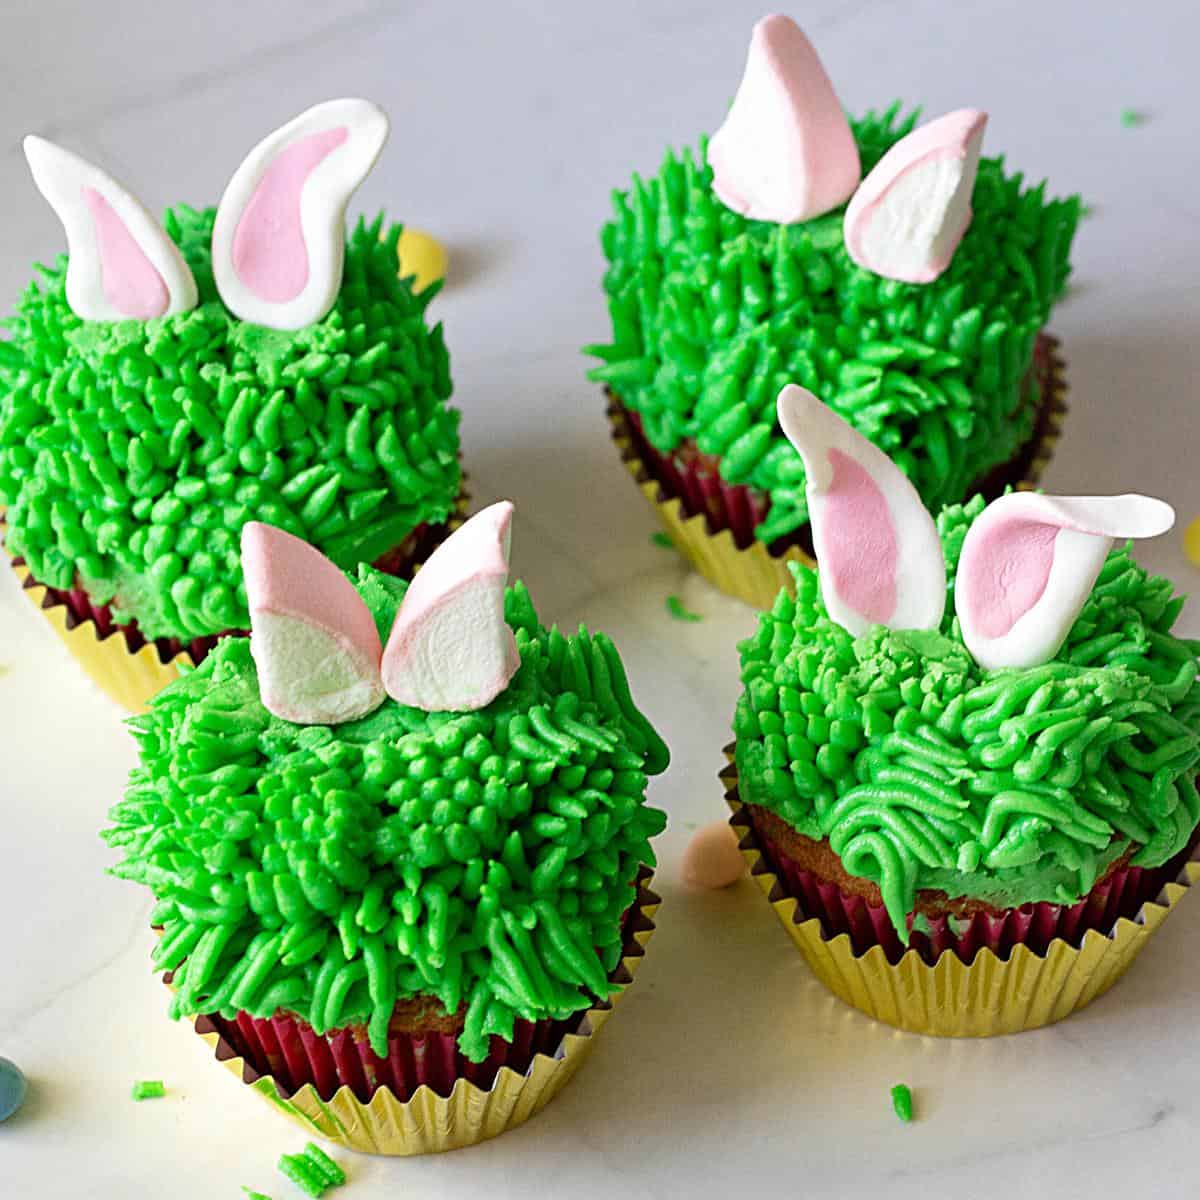 Cupcakes with grass frosting and bunny ears.